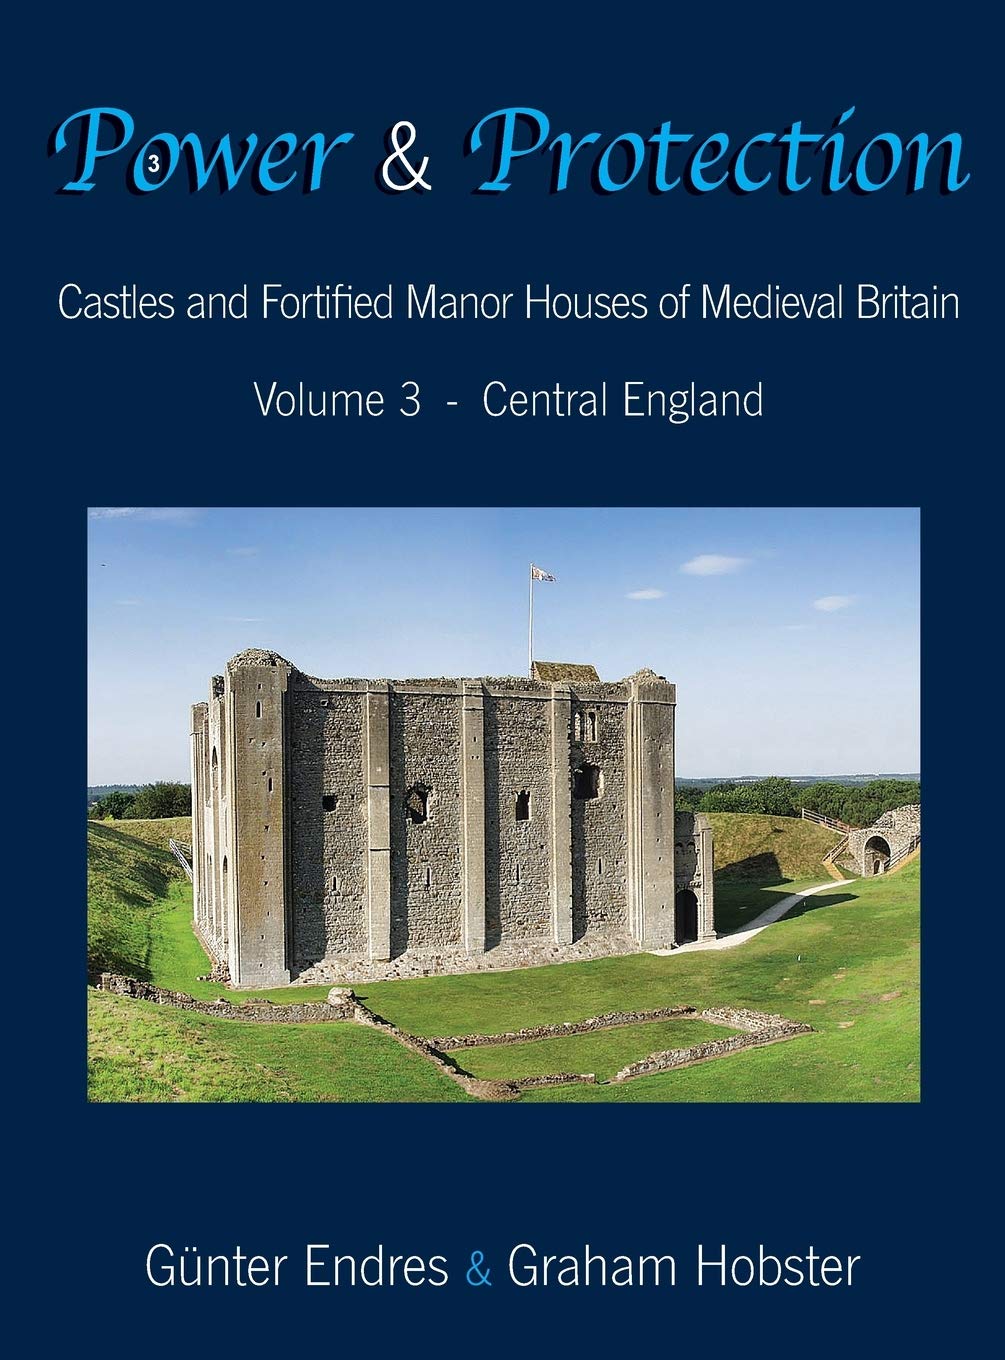 Power & Protection - Castles and Fortified Manor Houses of Medieval Britain